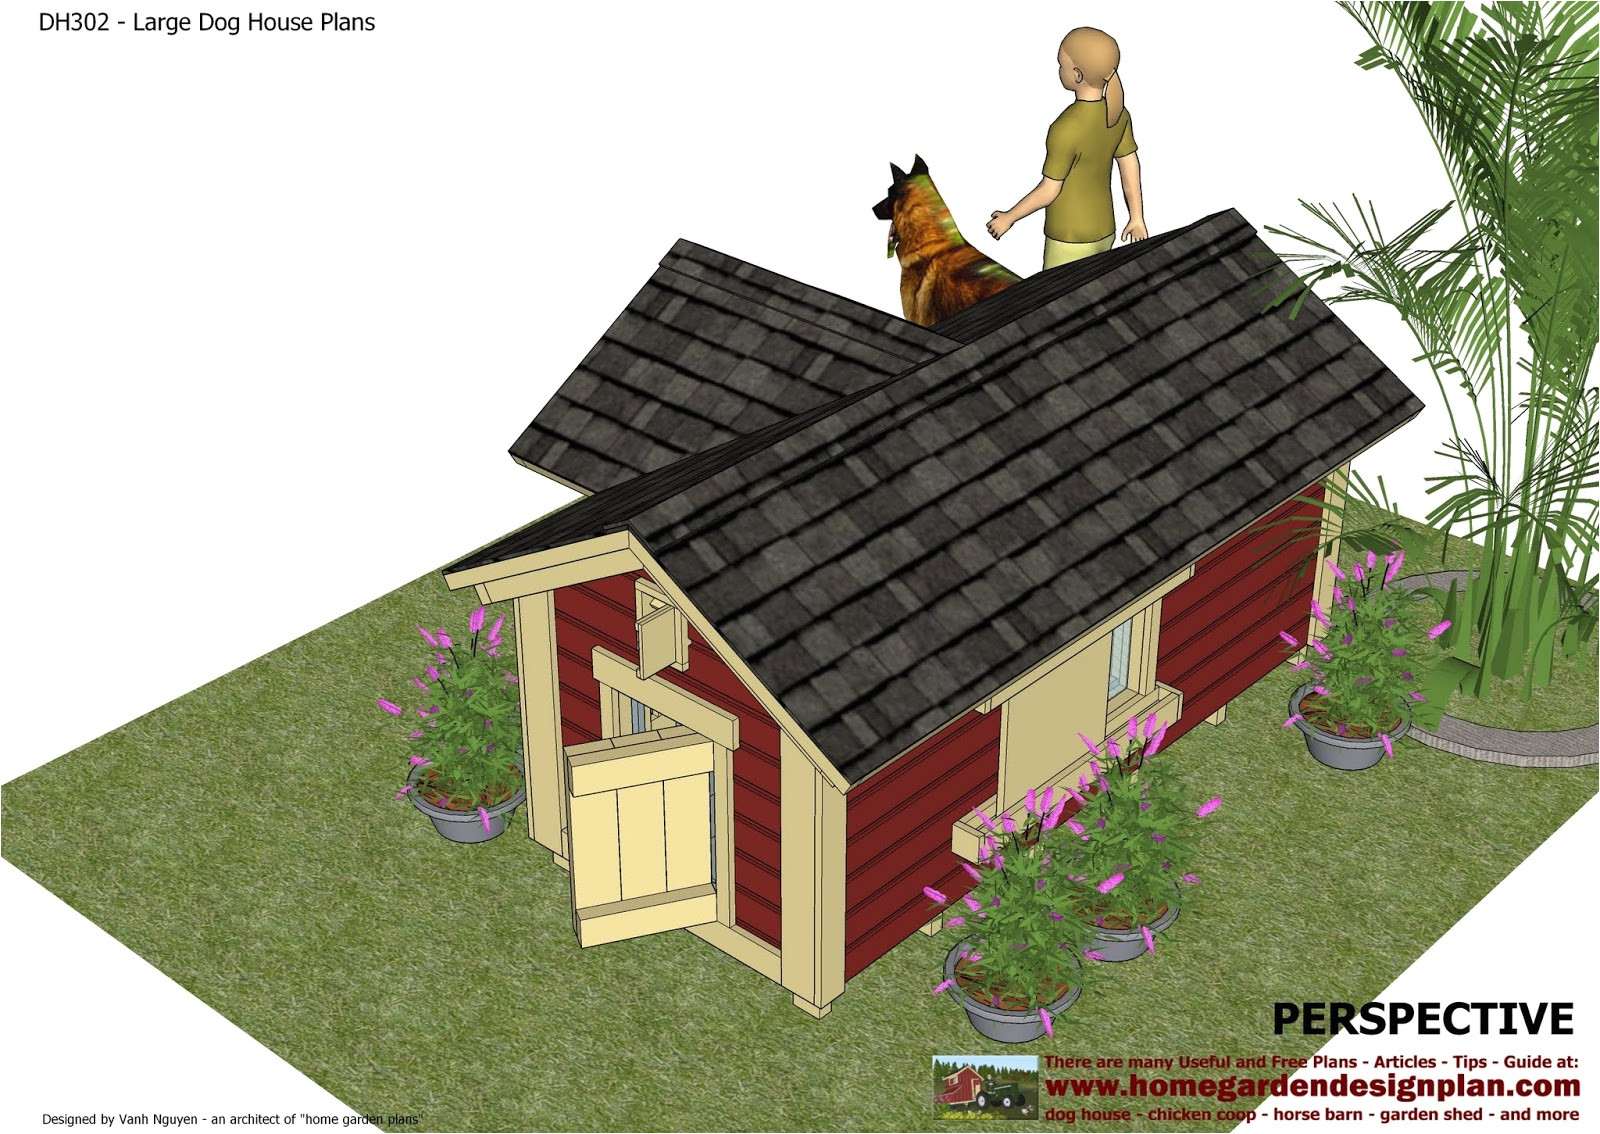 insulated dog house plans for large dogs free